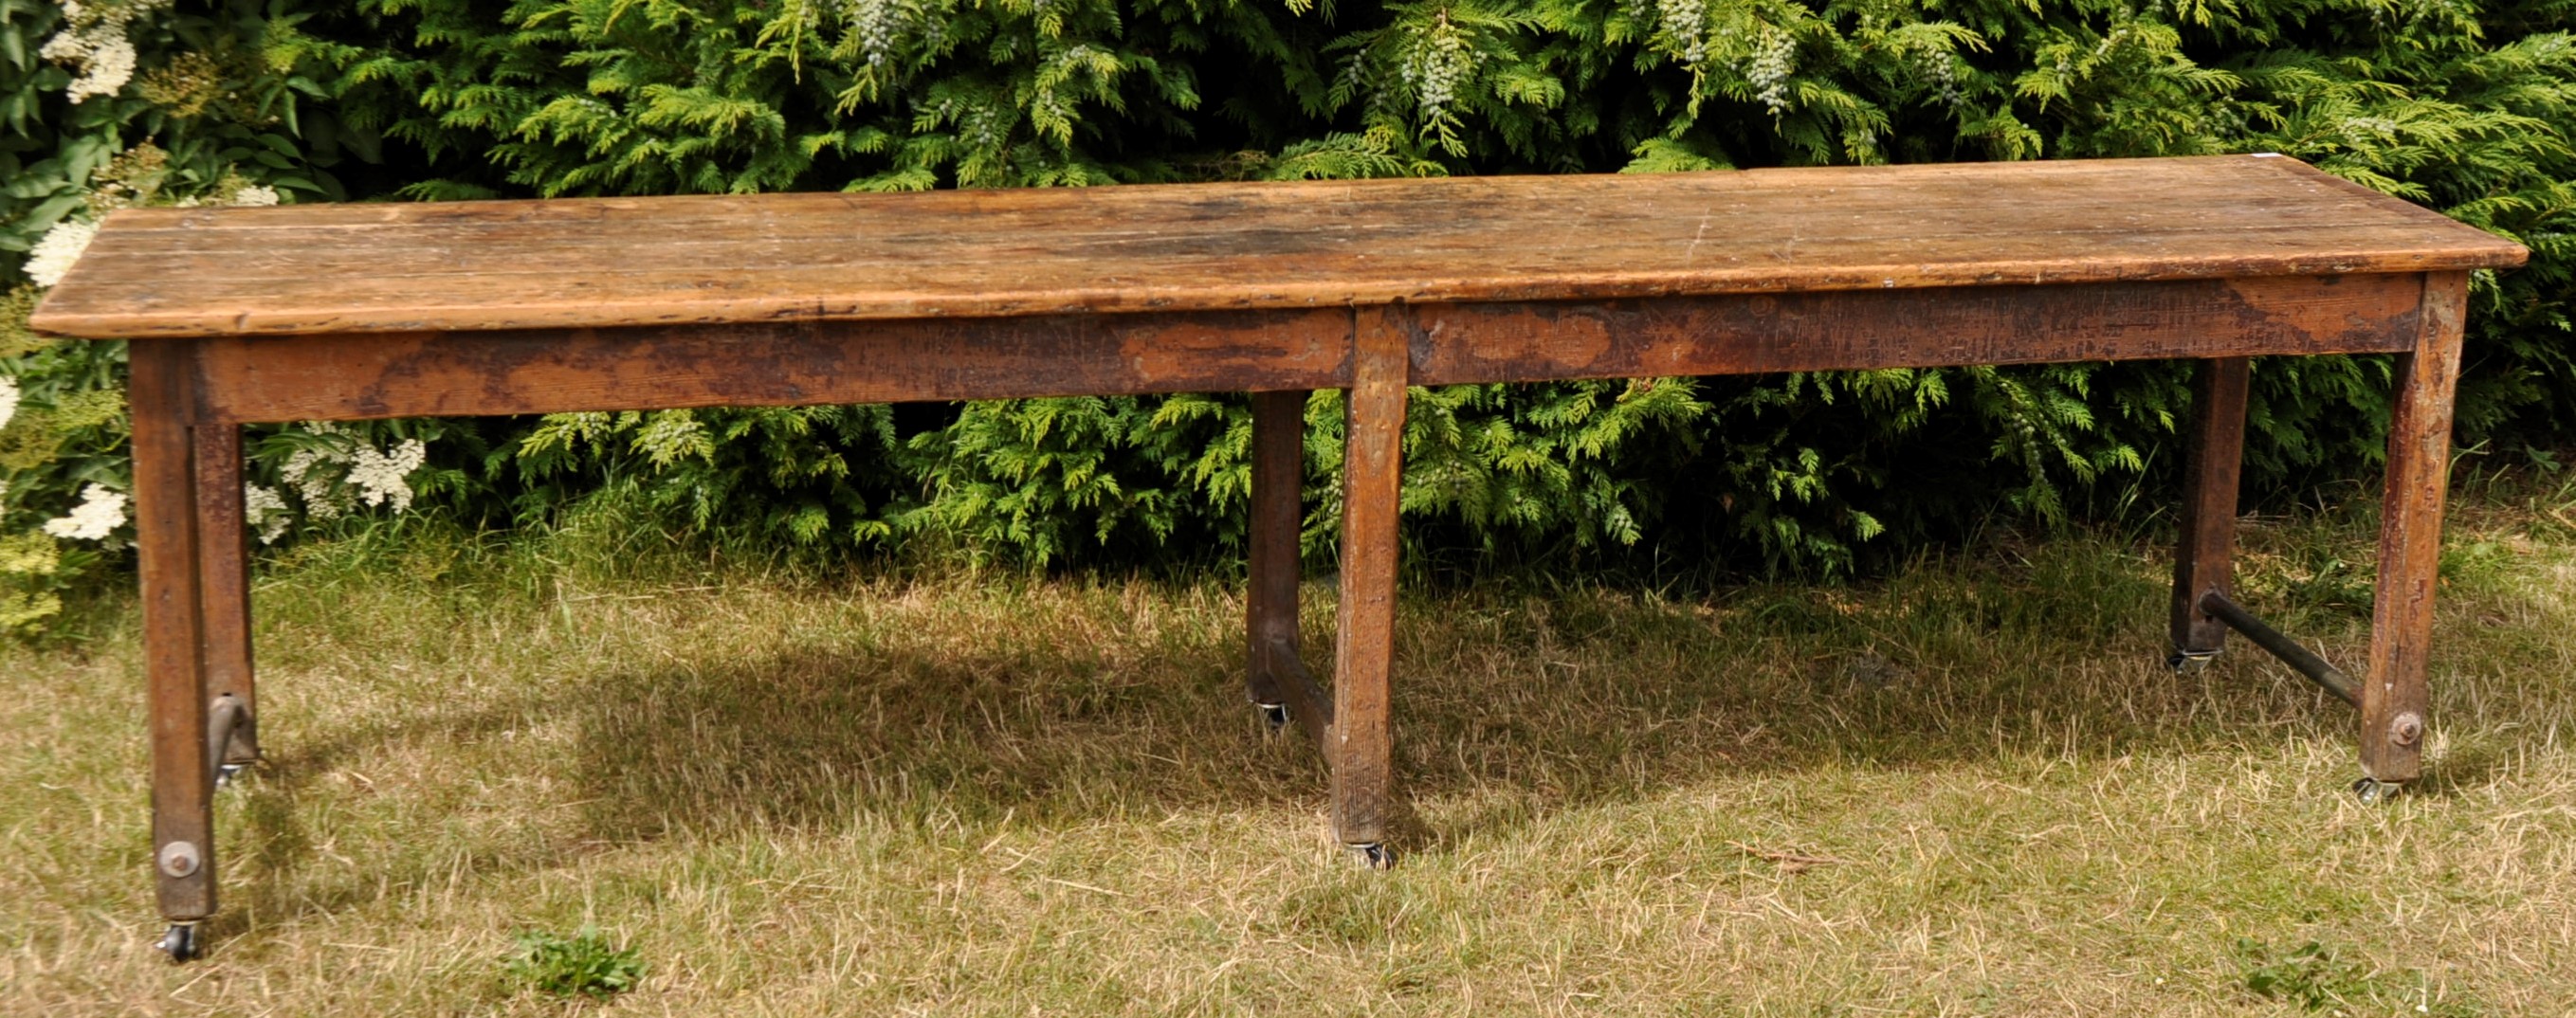 LARGE LATE 19TH CENTURY VICTORIAN PINE REFECTORY TABLE - Image 2 of 7